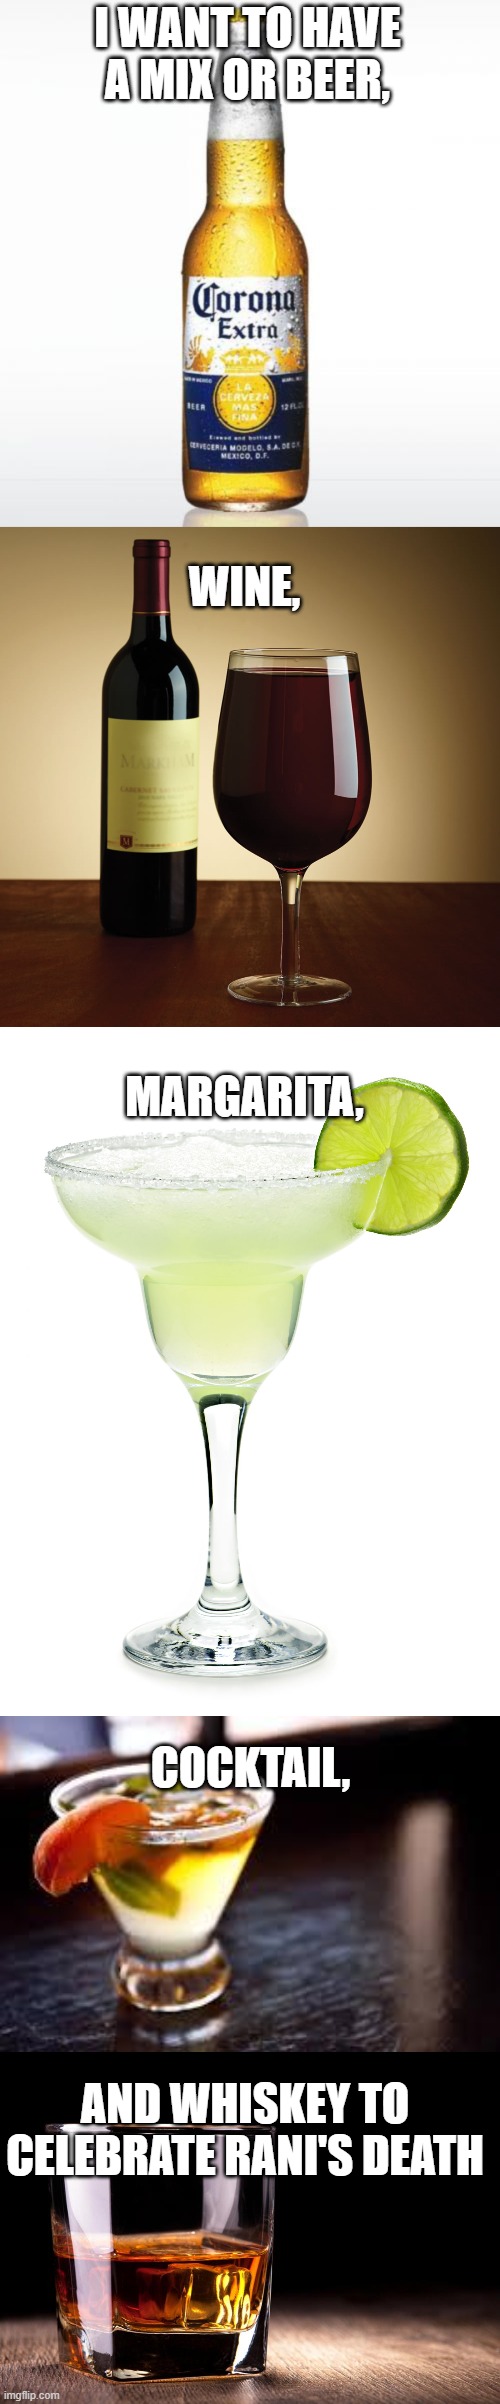 I WANT TO HAVE A MIX OR BEER, WINE, MARGARITA, COCKTAIL, AND WHISKEY TO CELEBRATE RANI'S DEATH | image tagged in memes,corona,wine bottle,margarita,cocktails,whiskey | made w/ Imgflip meme maker